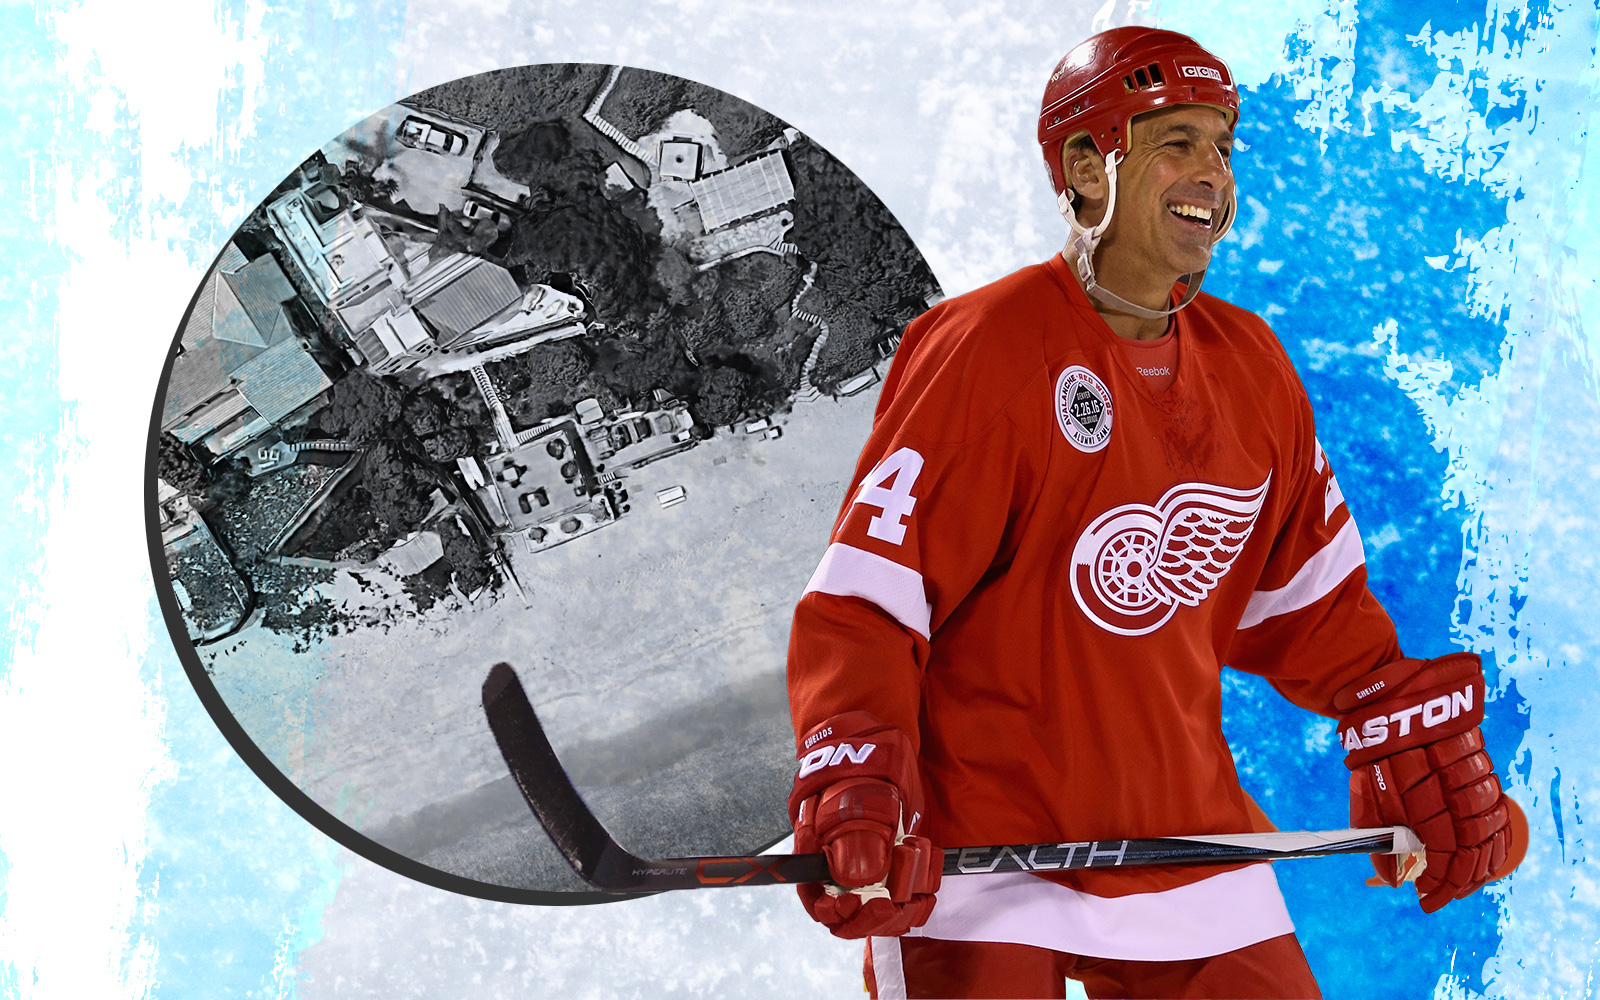 Chris Chelios leaving Red Wings organization to return home to Chicago